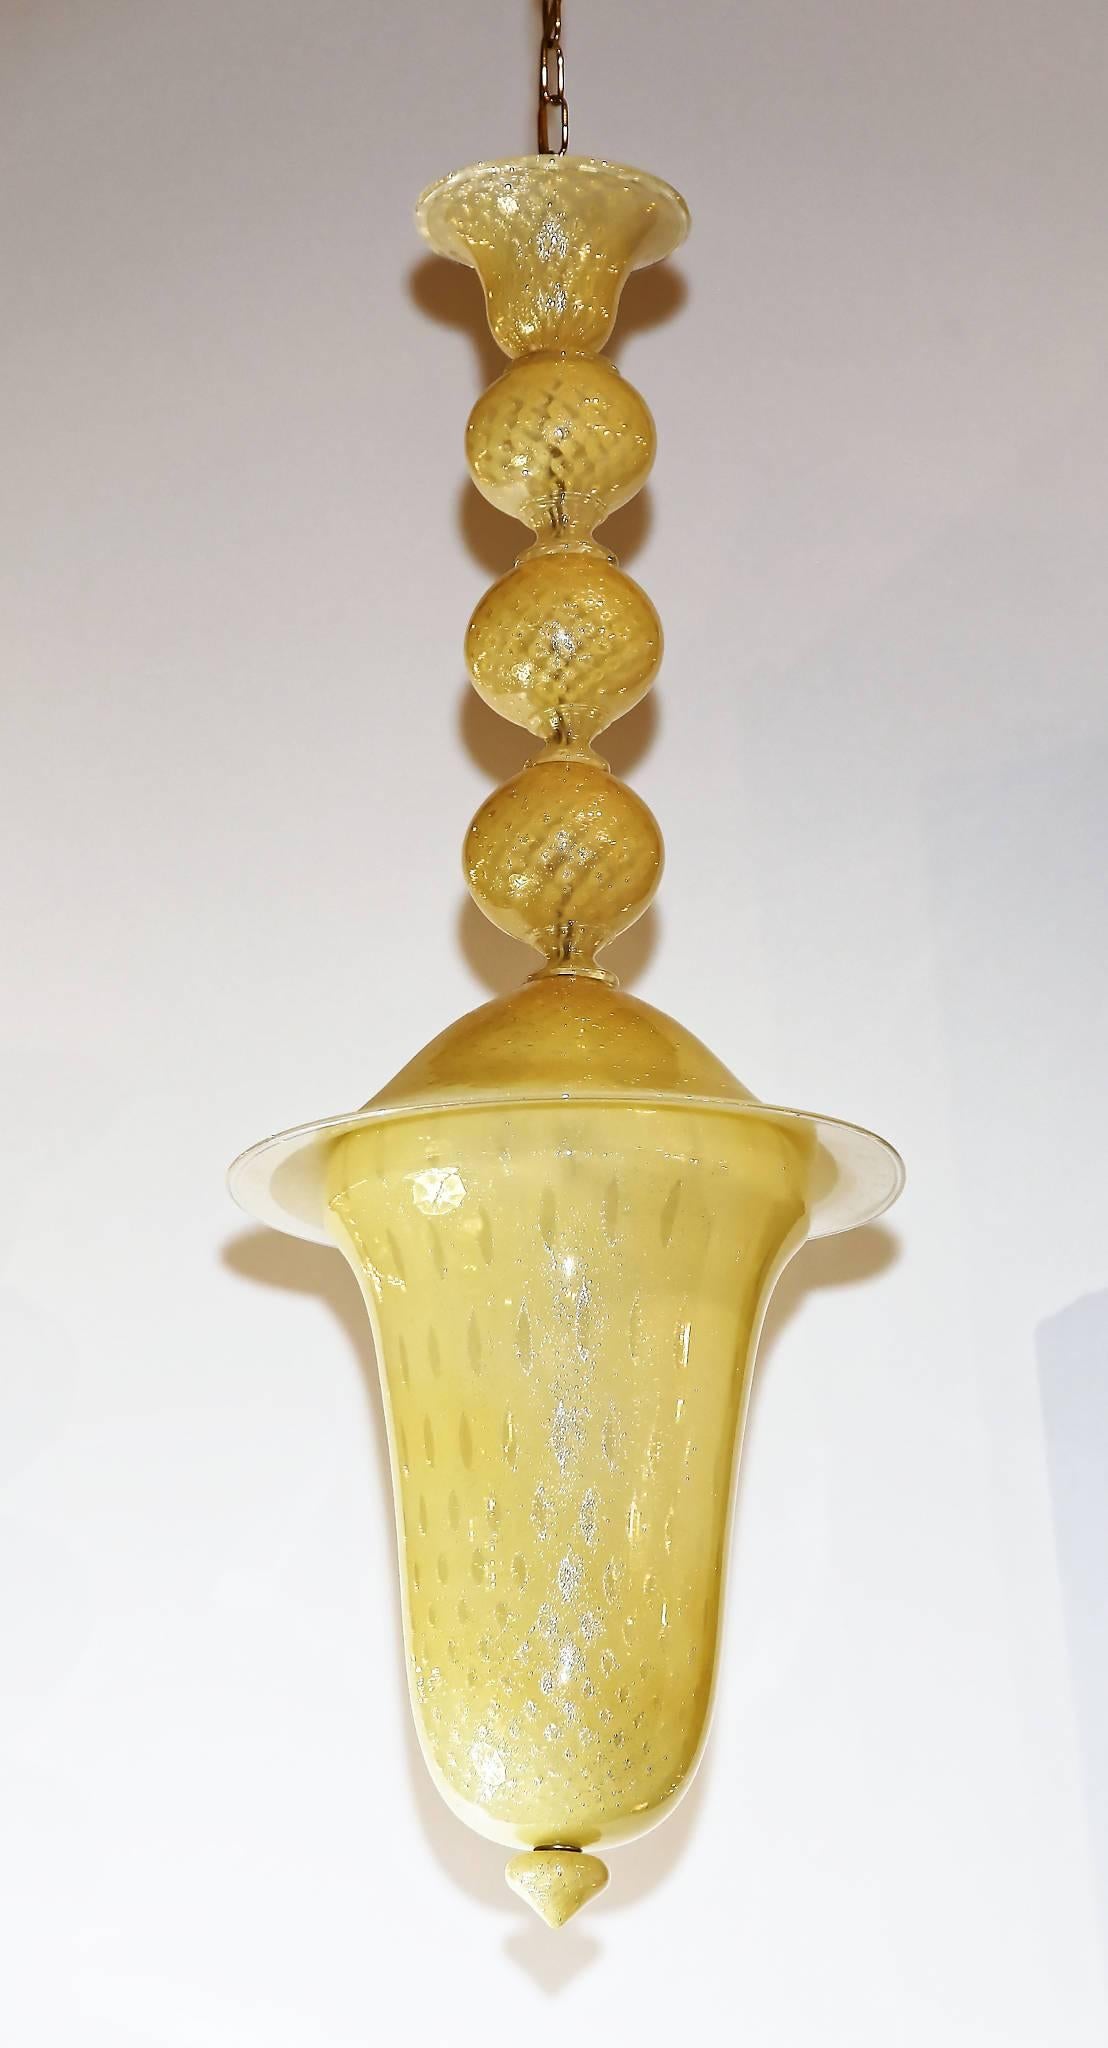 Spectacular citron color large-scale Mid-Century Seguso Murano lantern. The glass in this lantern is notable for its geometric air trap glass blowing technique that is further enhanced by the generous use of metallic gold inclusions.